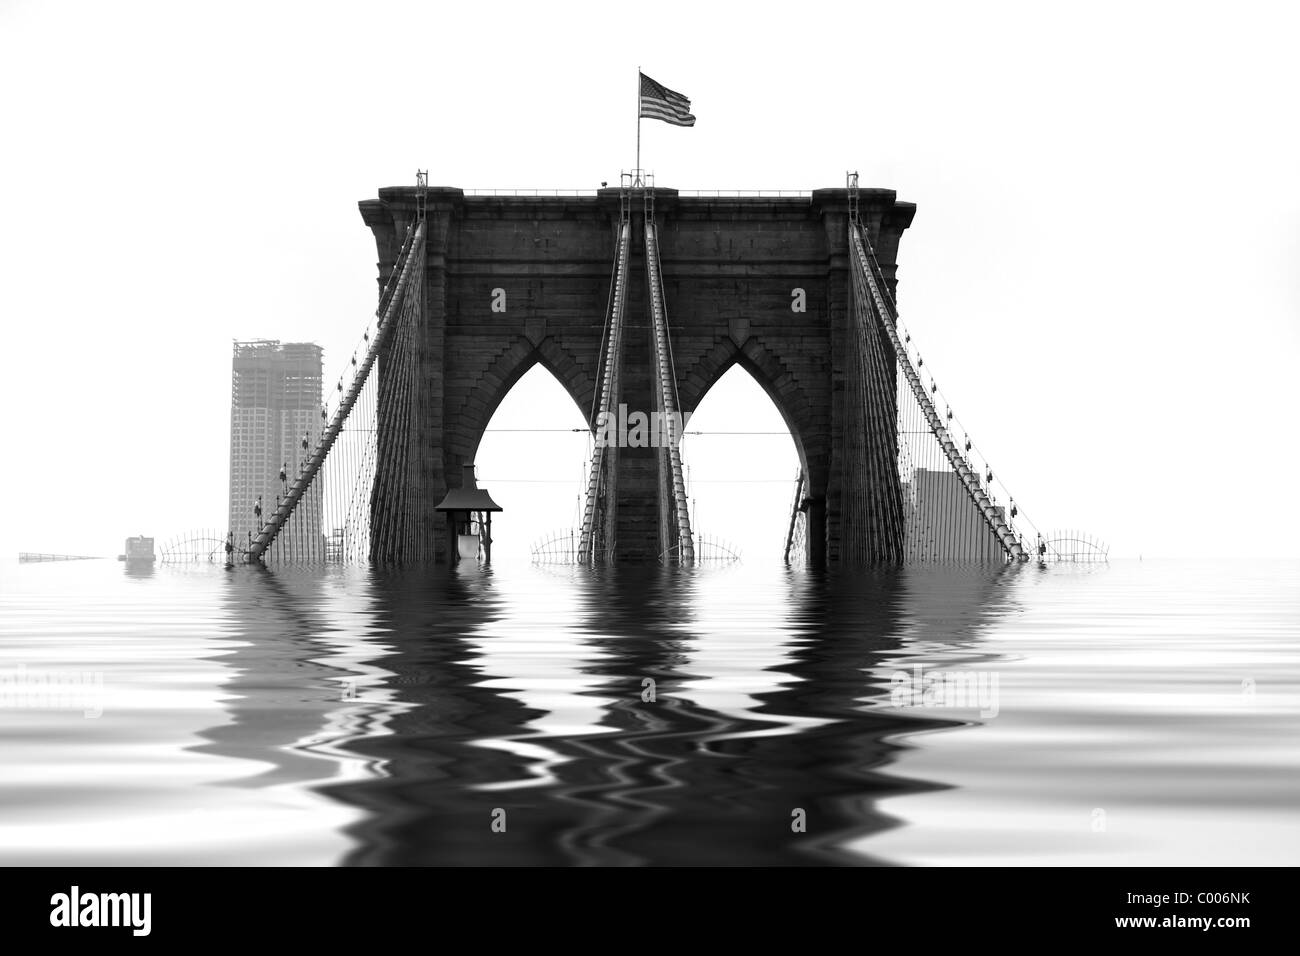 Conceptual illustration of the Brooklyn Bridge flooded with water due to natural disaster or global warming. Stock Photo